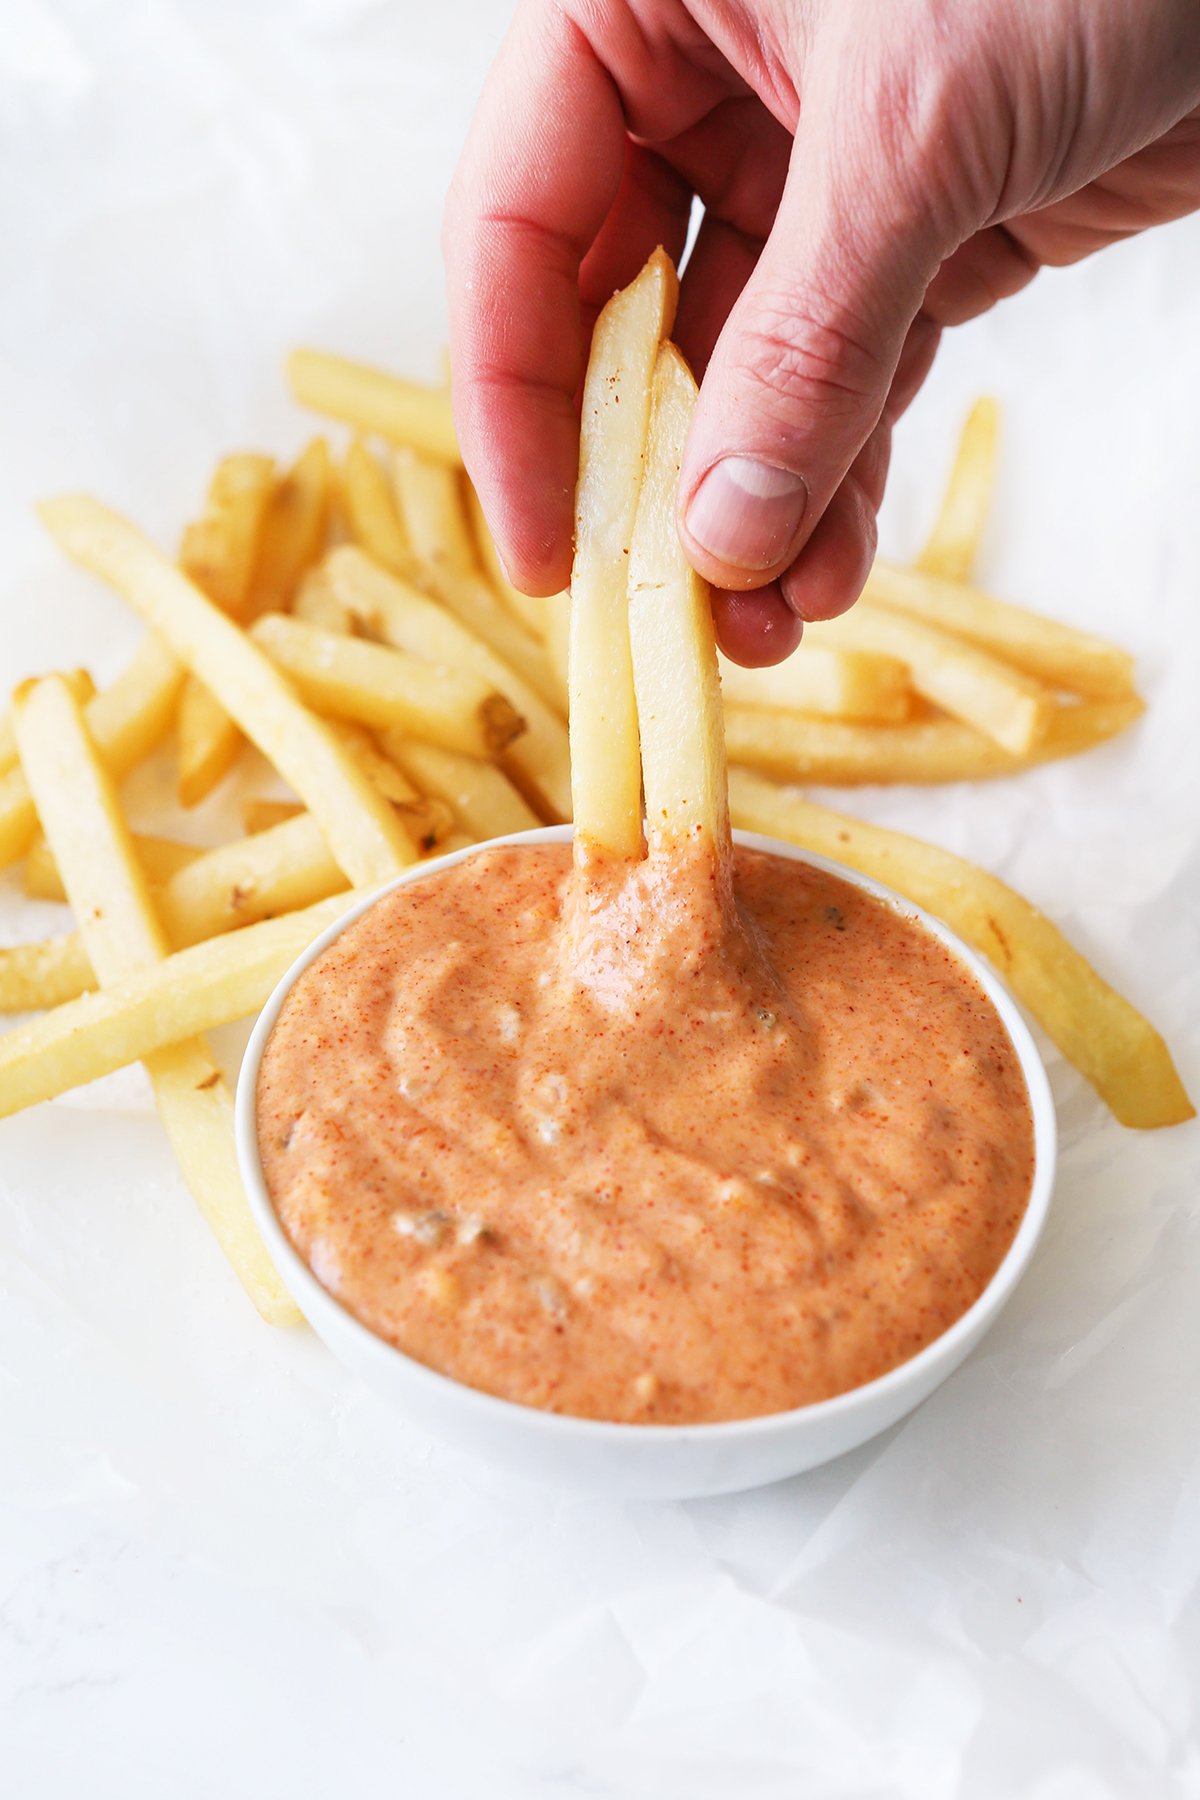 Hand dipping two fries into a bowl of sauce.